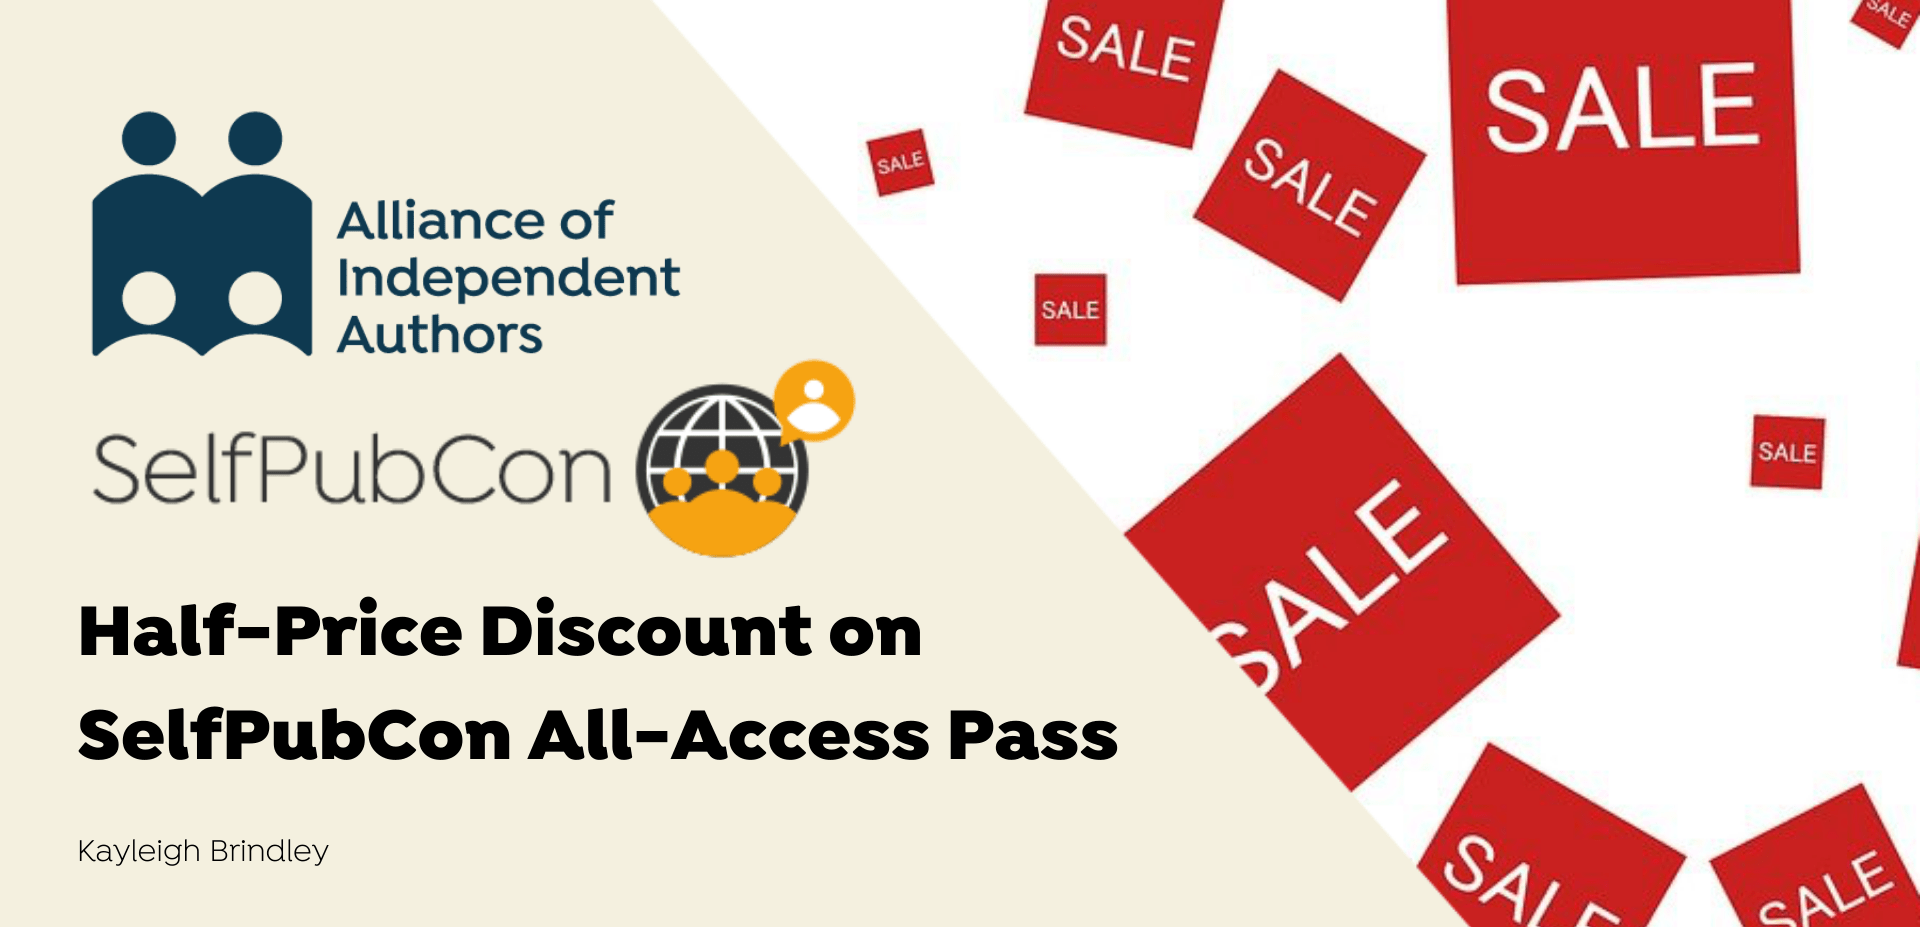 Half-Price Discount on SelfPubCon All-Access Pass